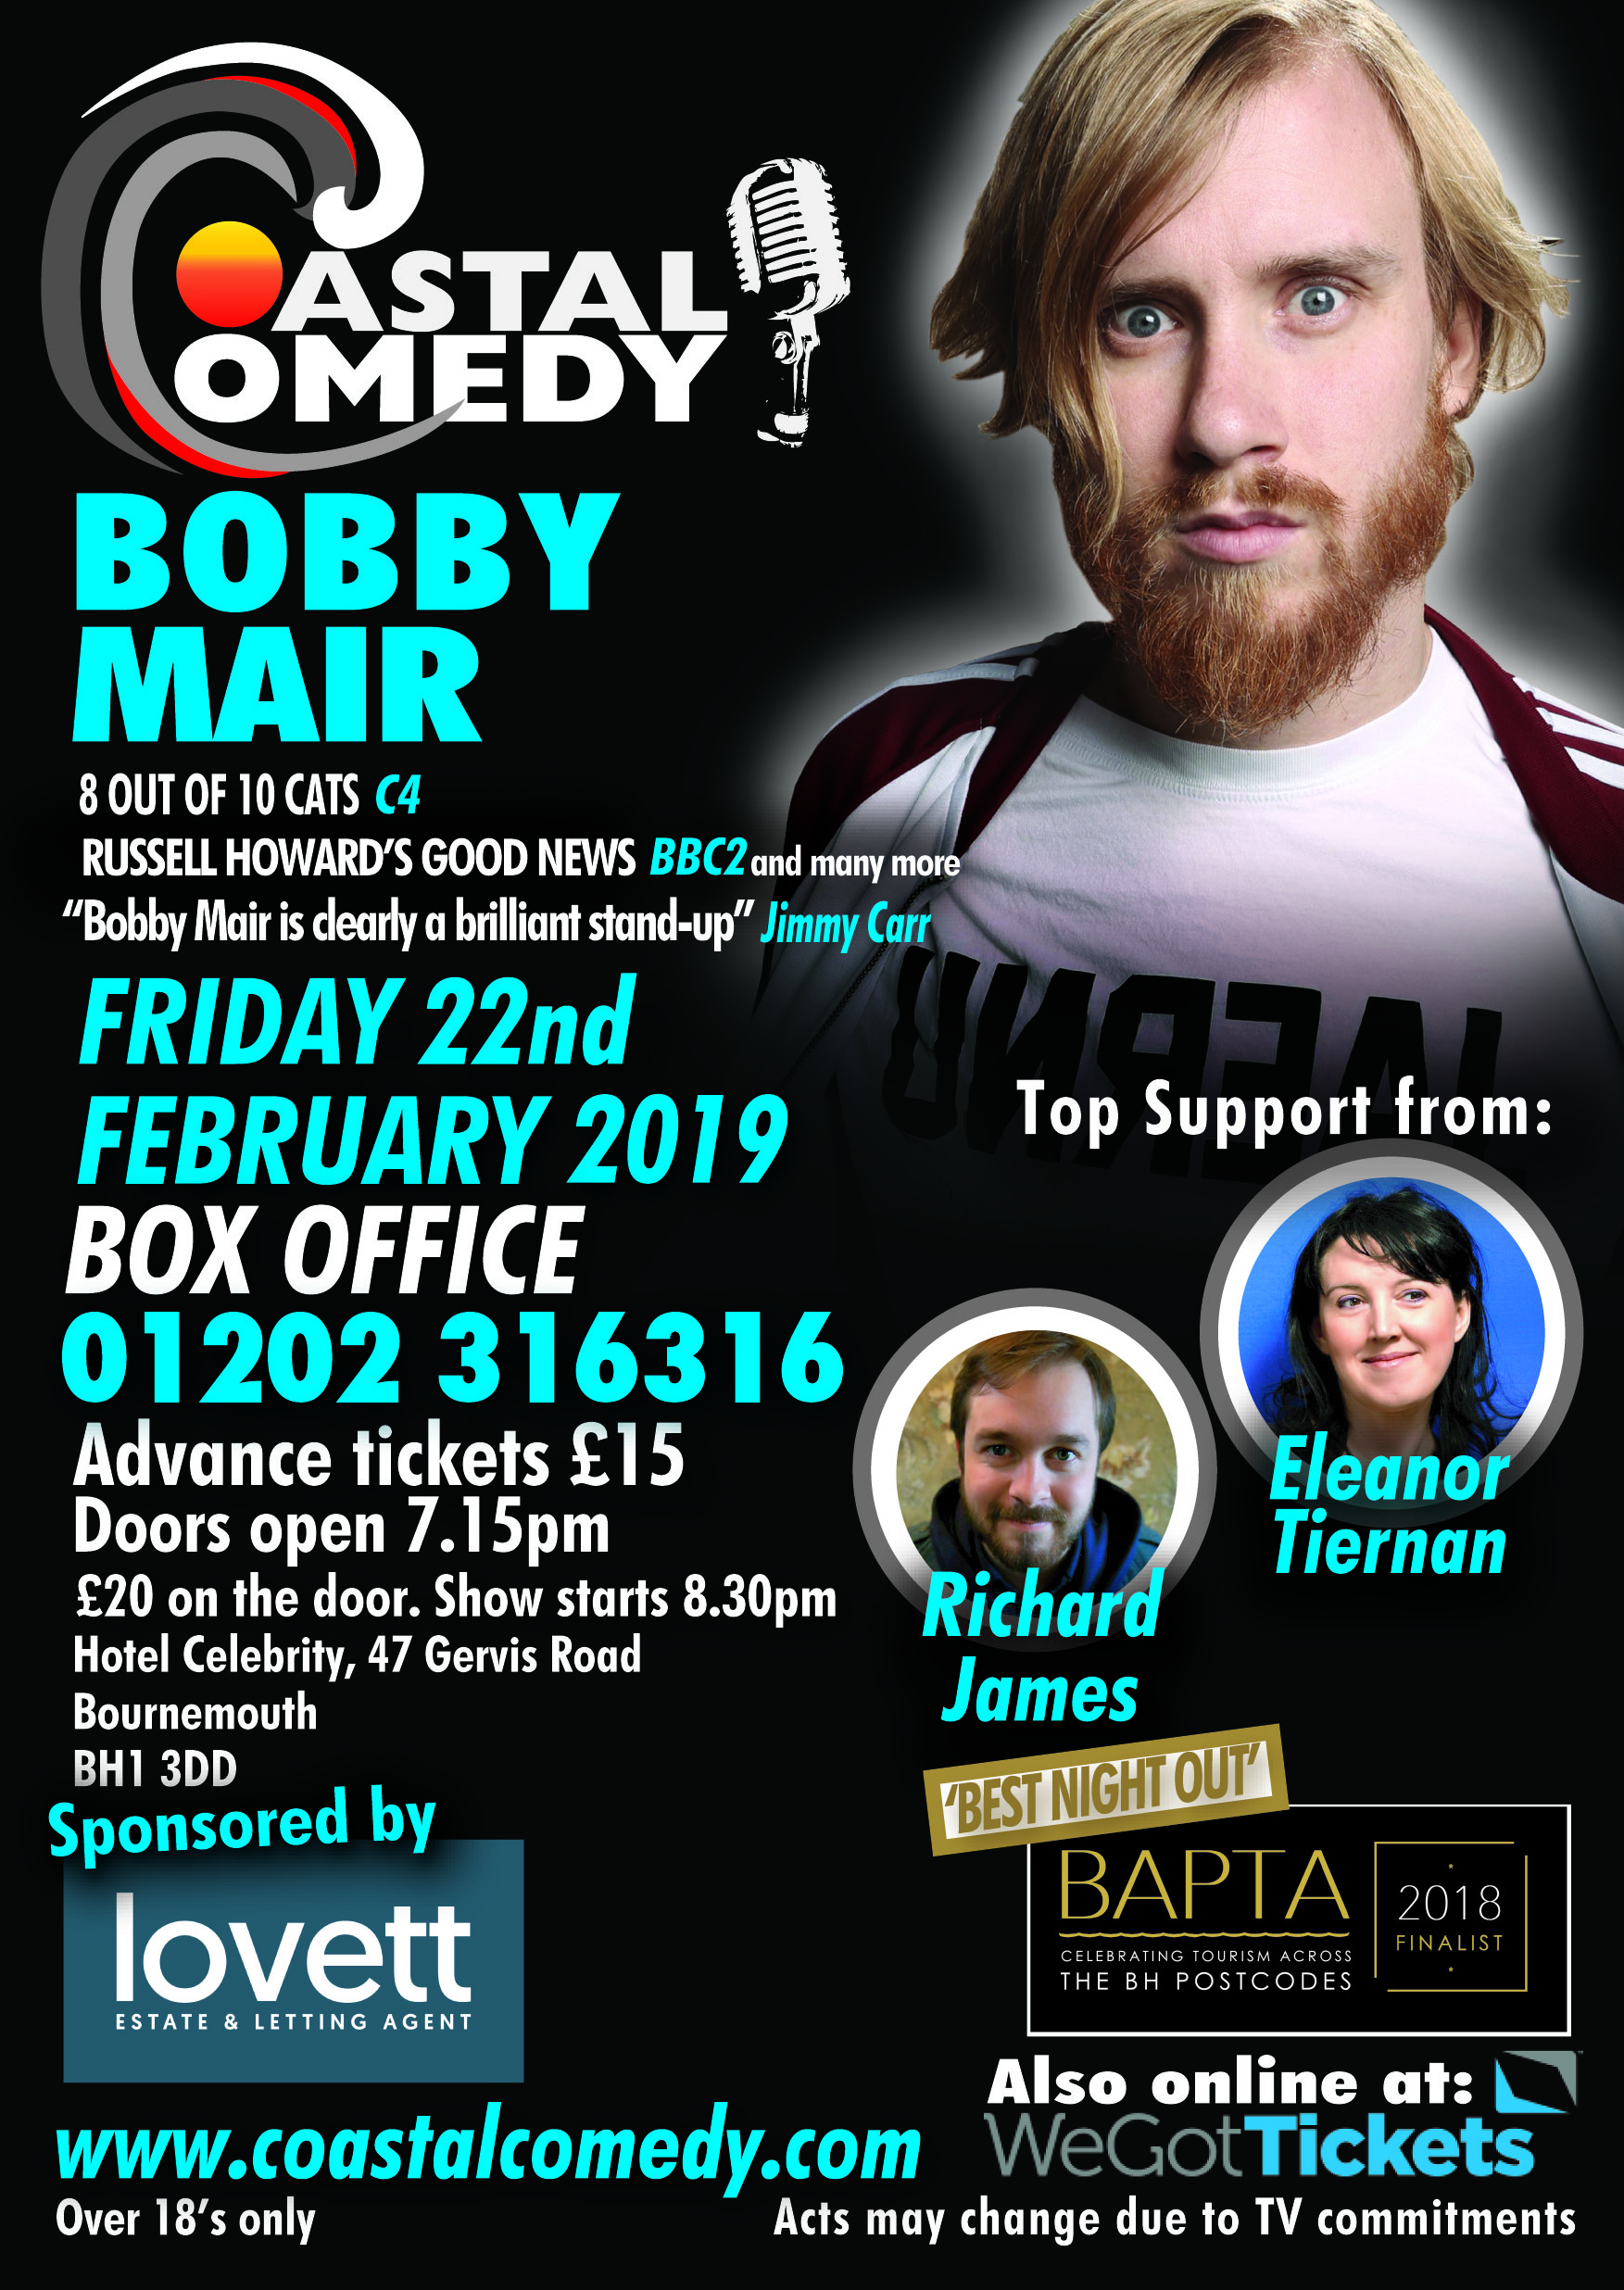 bobby mair, dorset, bournemouth, what's on, comedy, lol, standup, comedienne, Adrienne, BH stars,